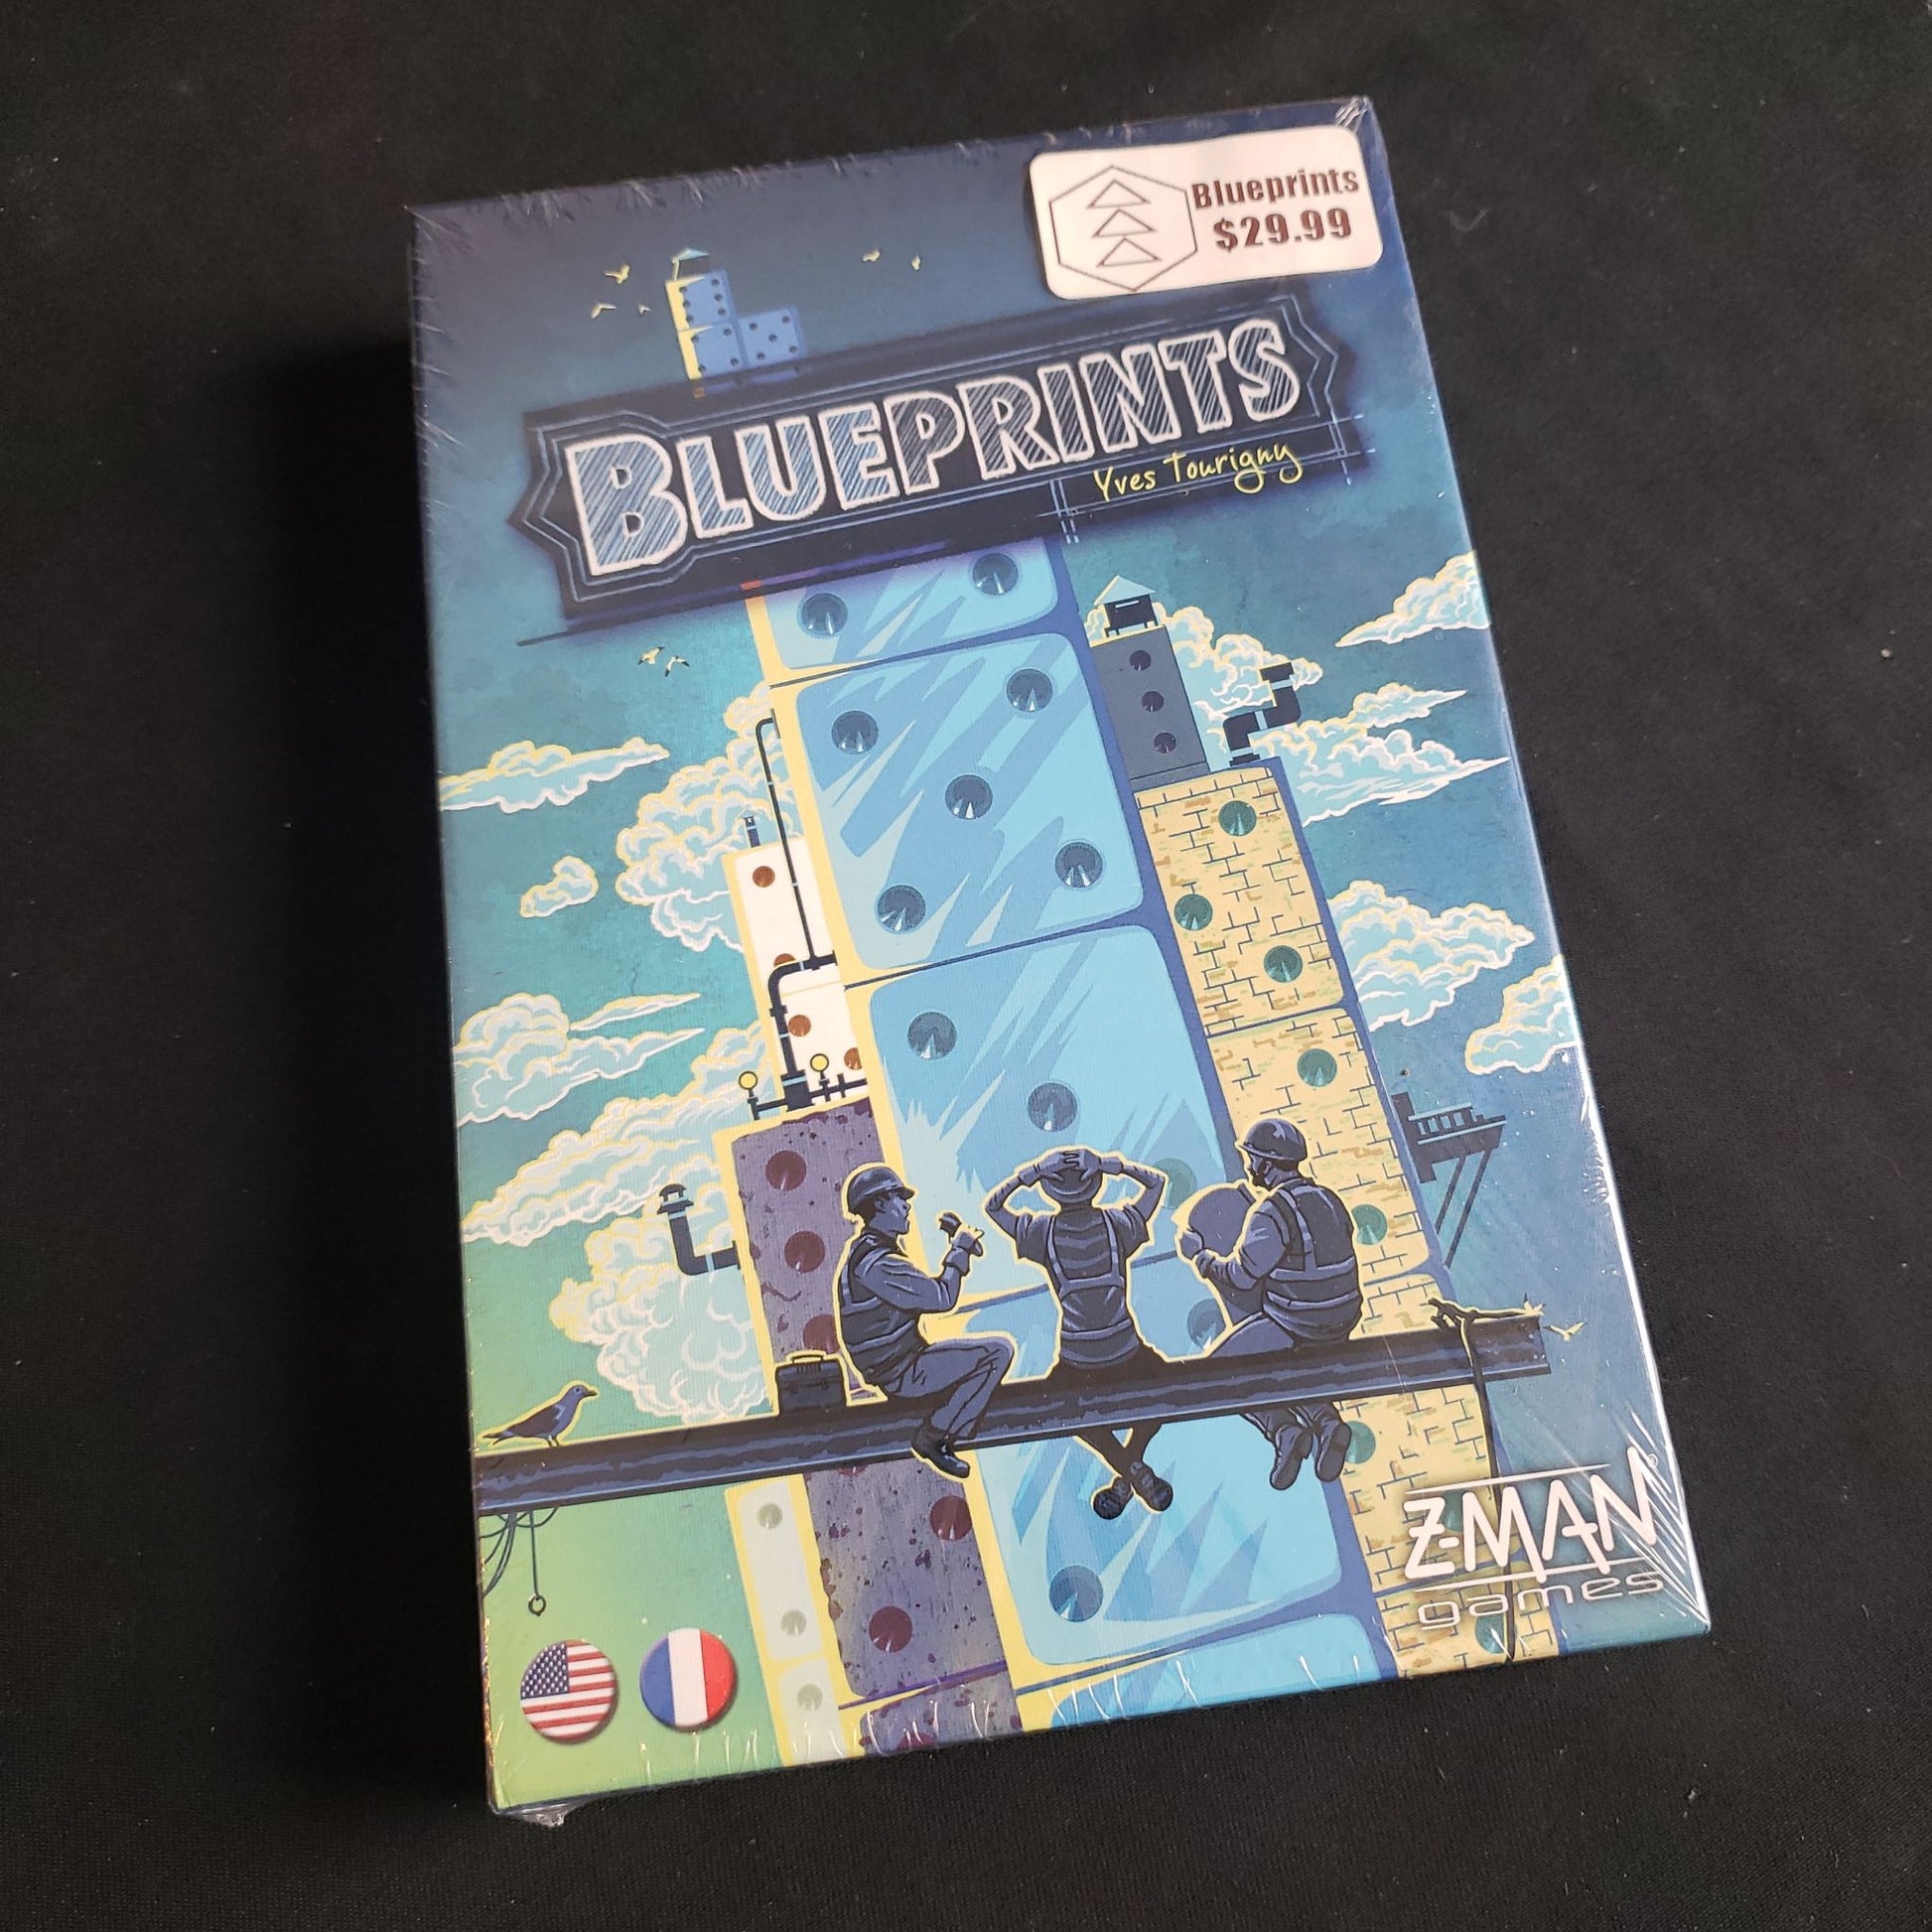 Image shows the front cover of the box of the Blueprints board game